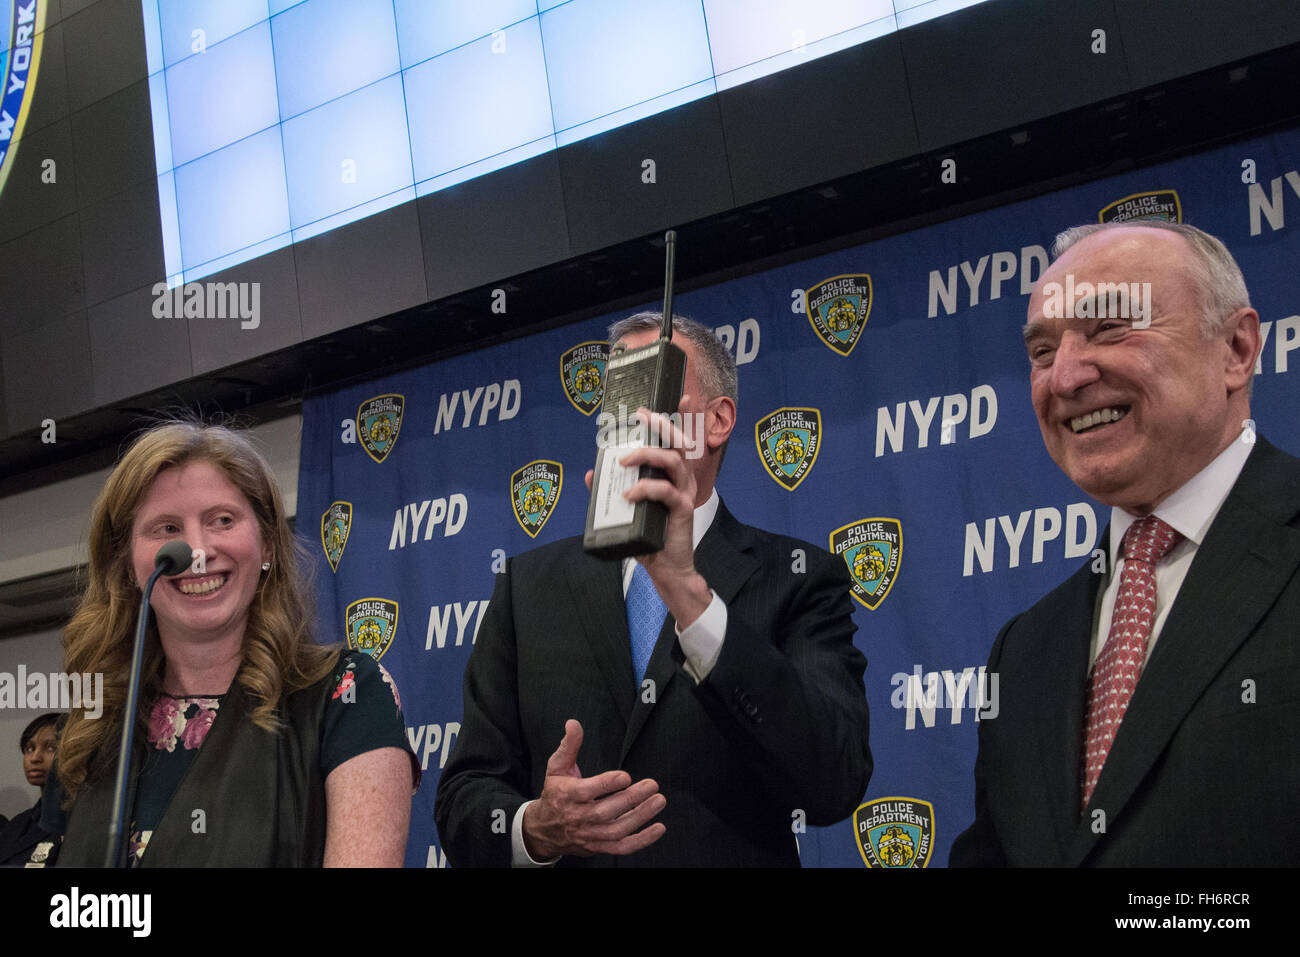 New York, United States. 23rd Feb, 2016. Mayor de Blasio displays an antique police radio which he hands to Commissioner Bratton. NYC Mayor Bill de Blasio and Police Commissioner William Bratton held a press briefing at One Police Plaza, the headquarters of the NYPD, to announce the launch of 'CompStat 2.0,' a new system for both publicly sharing crime data and enabling much accelerated distribution of vital police information resources among officers in the field. Credit:  Albin Lohr-Jones/Pacific Press/Alamy Live News Stock Photo